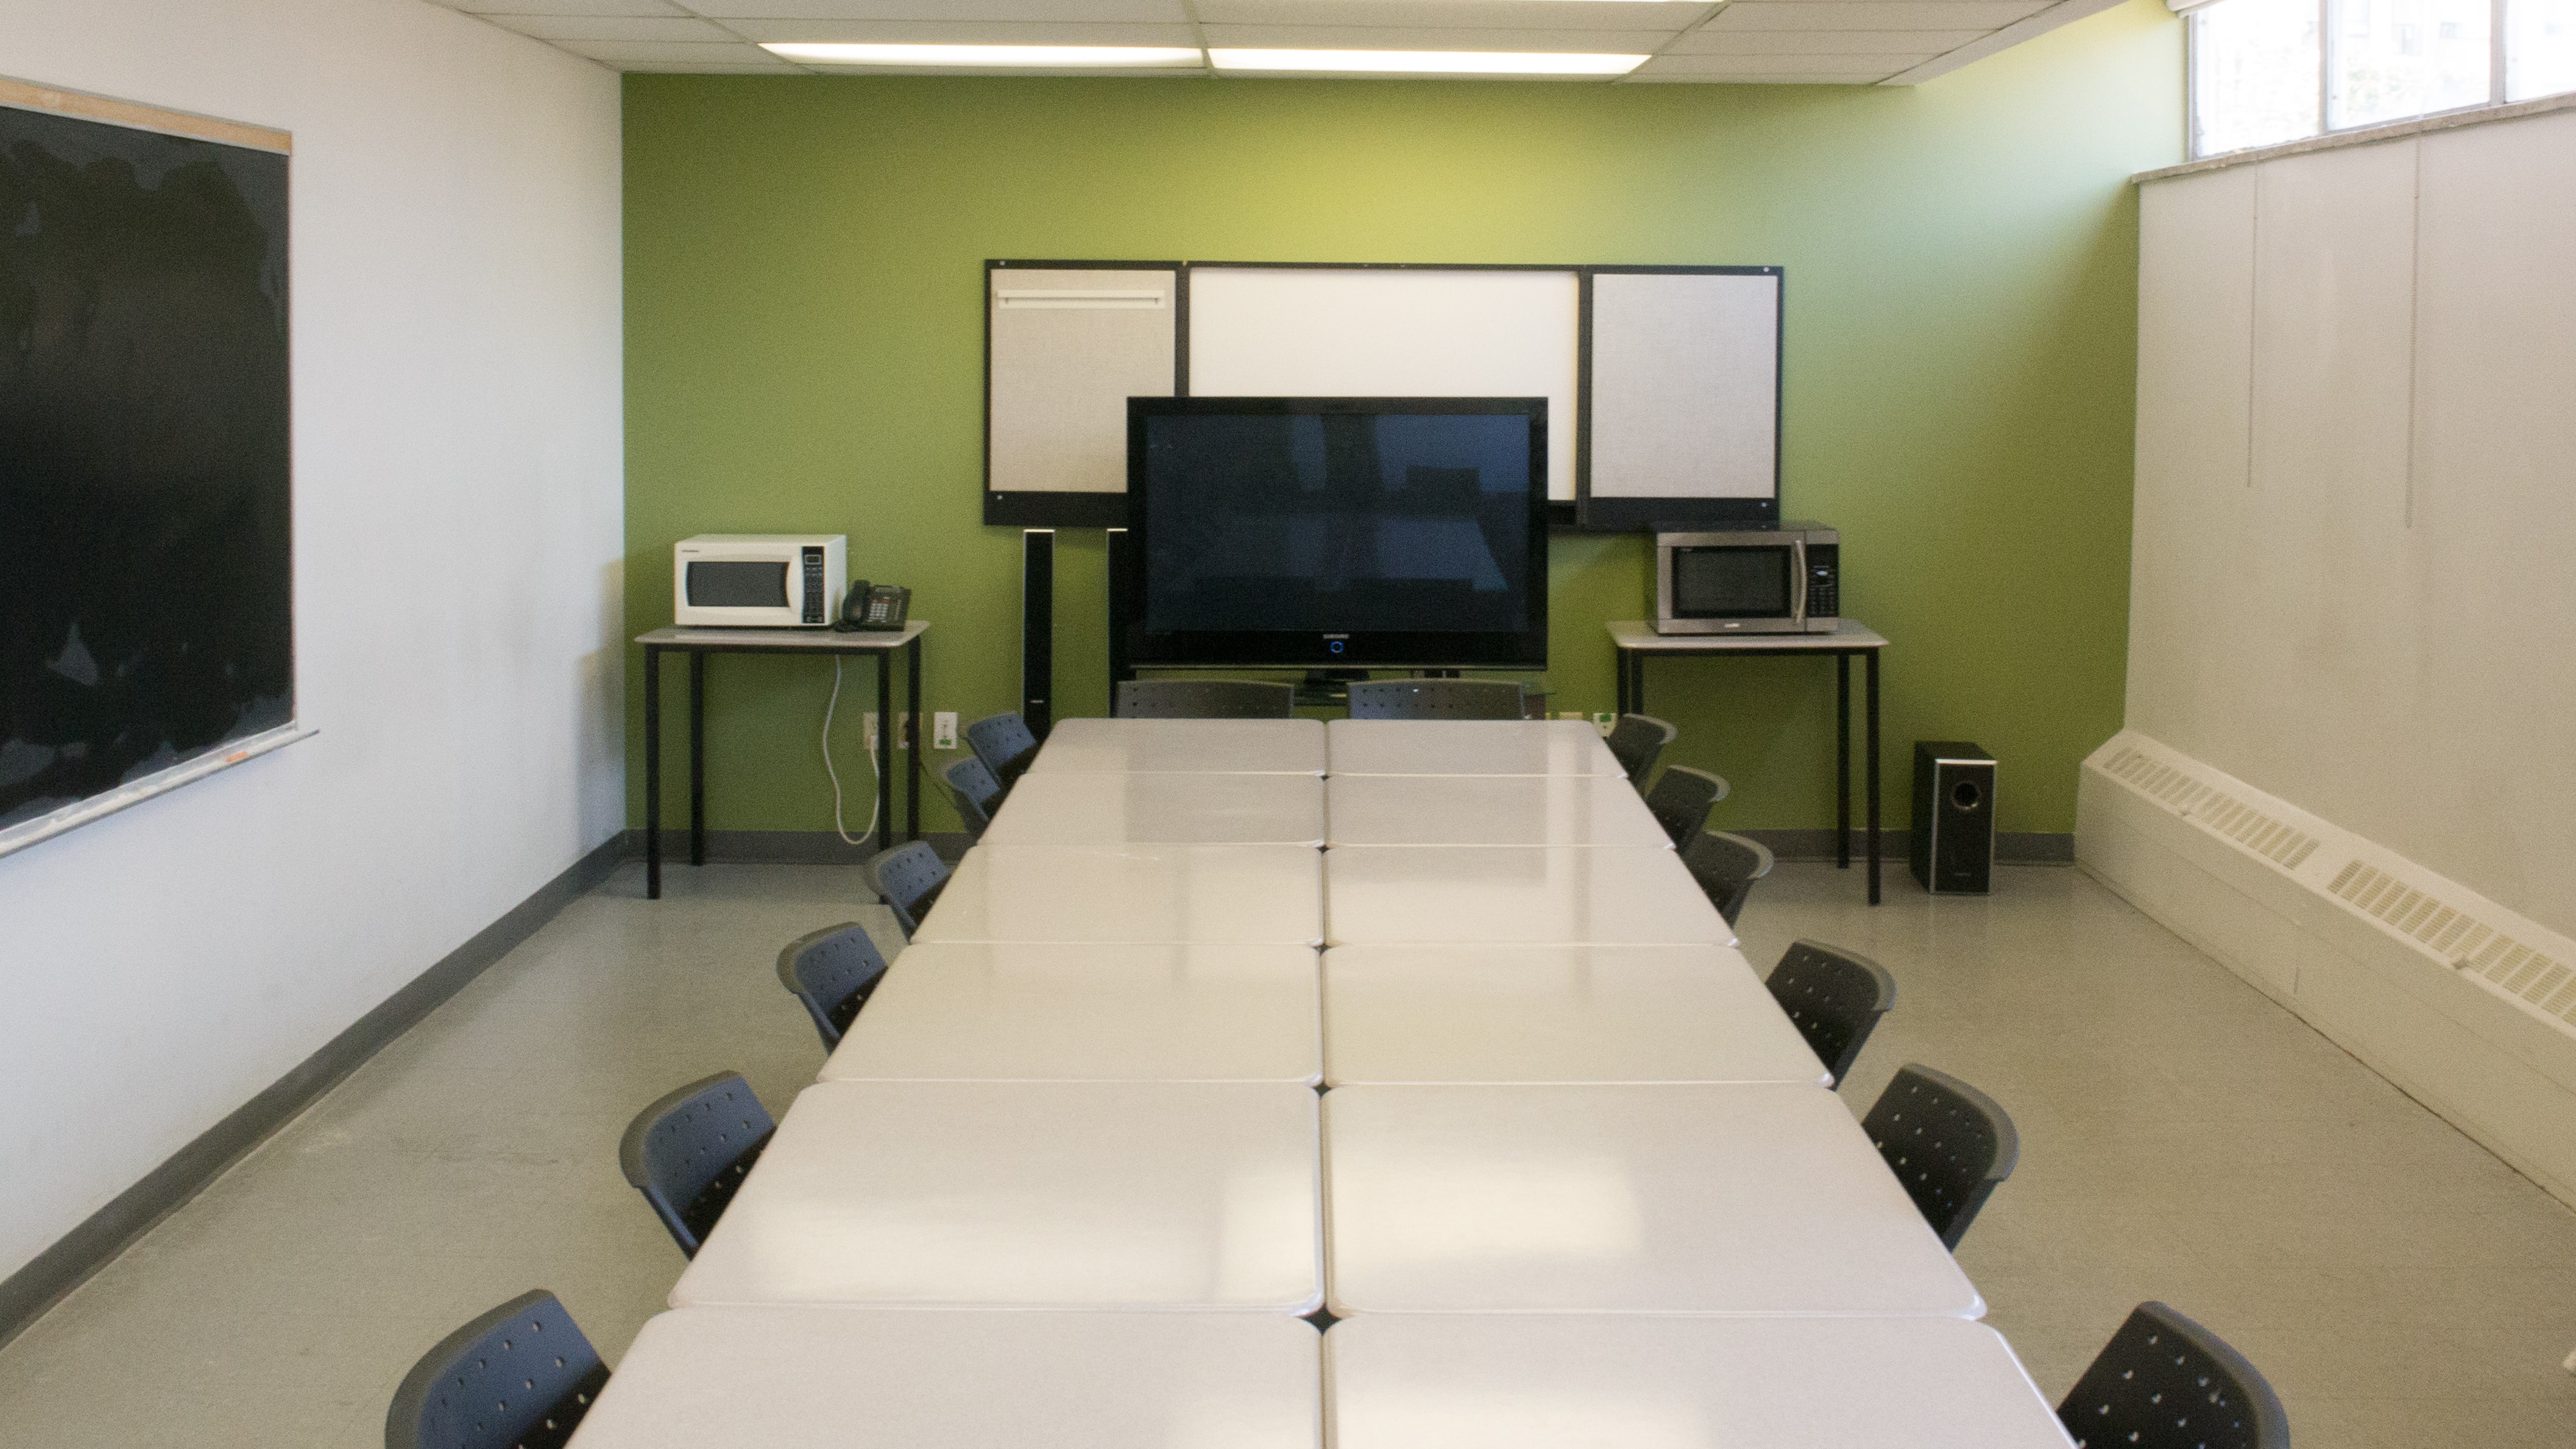 Classroom with tables, blackboard, and TV